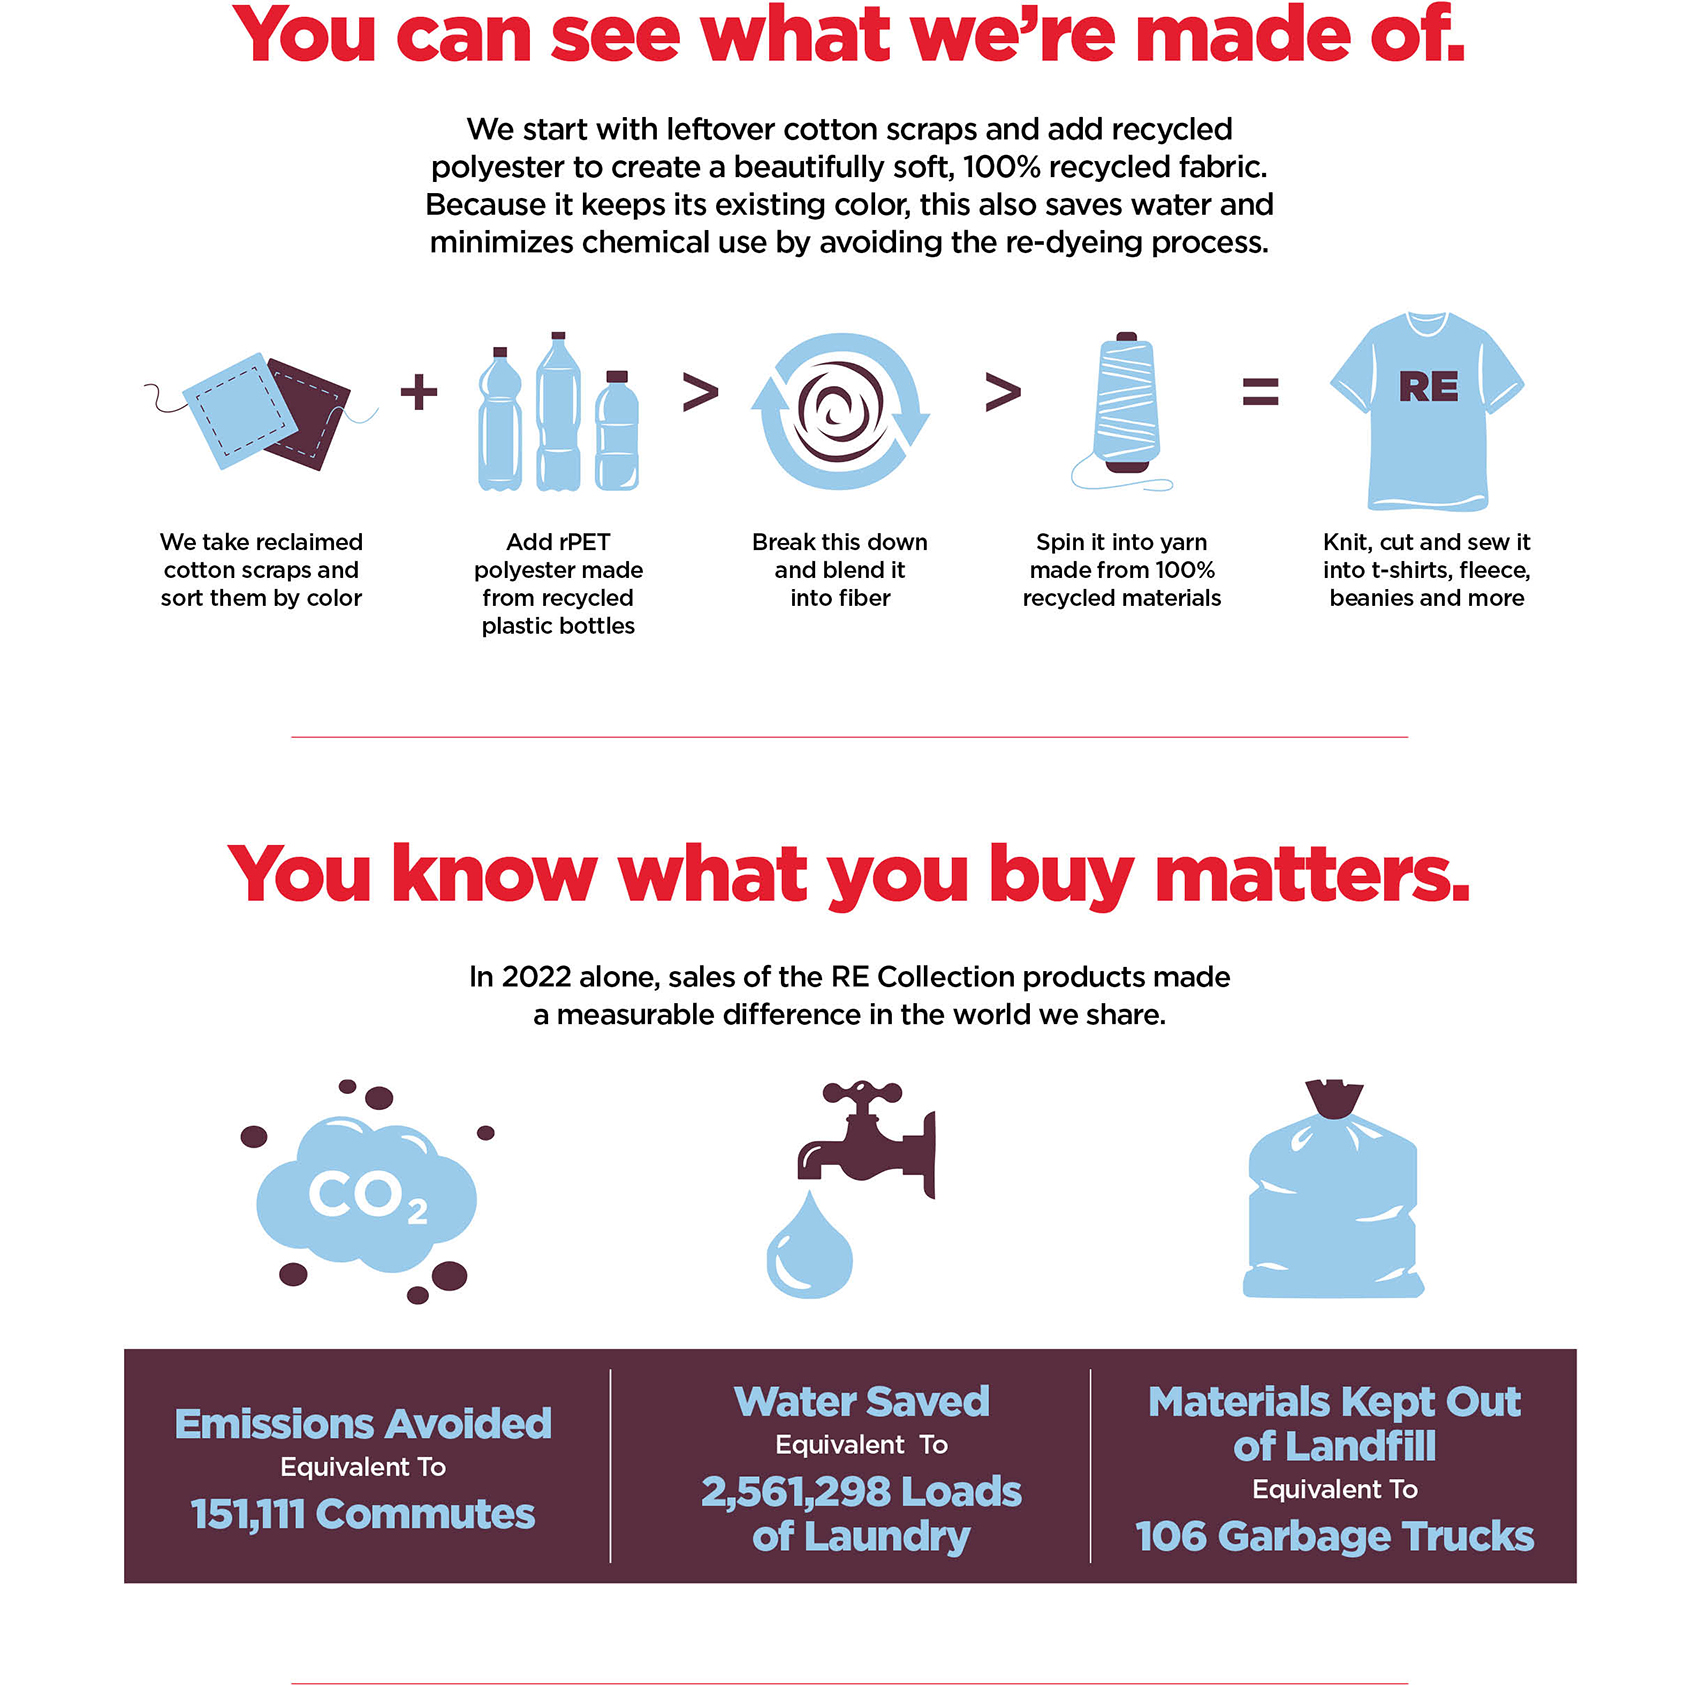 What you buy matters